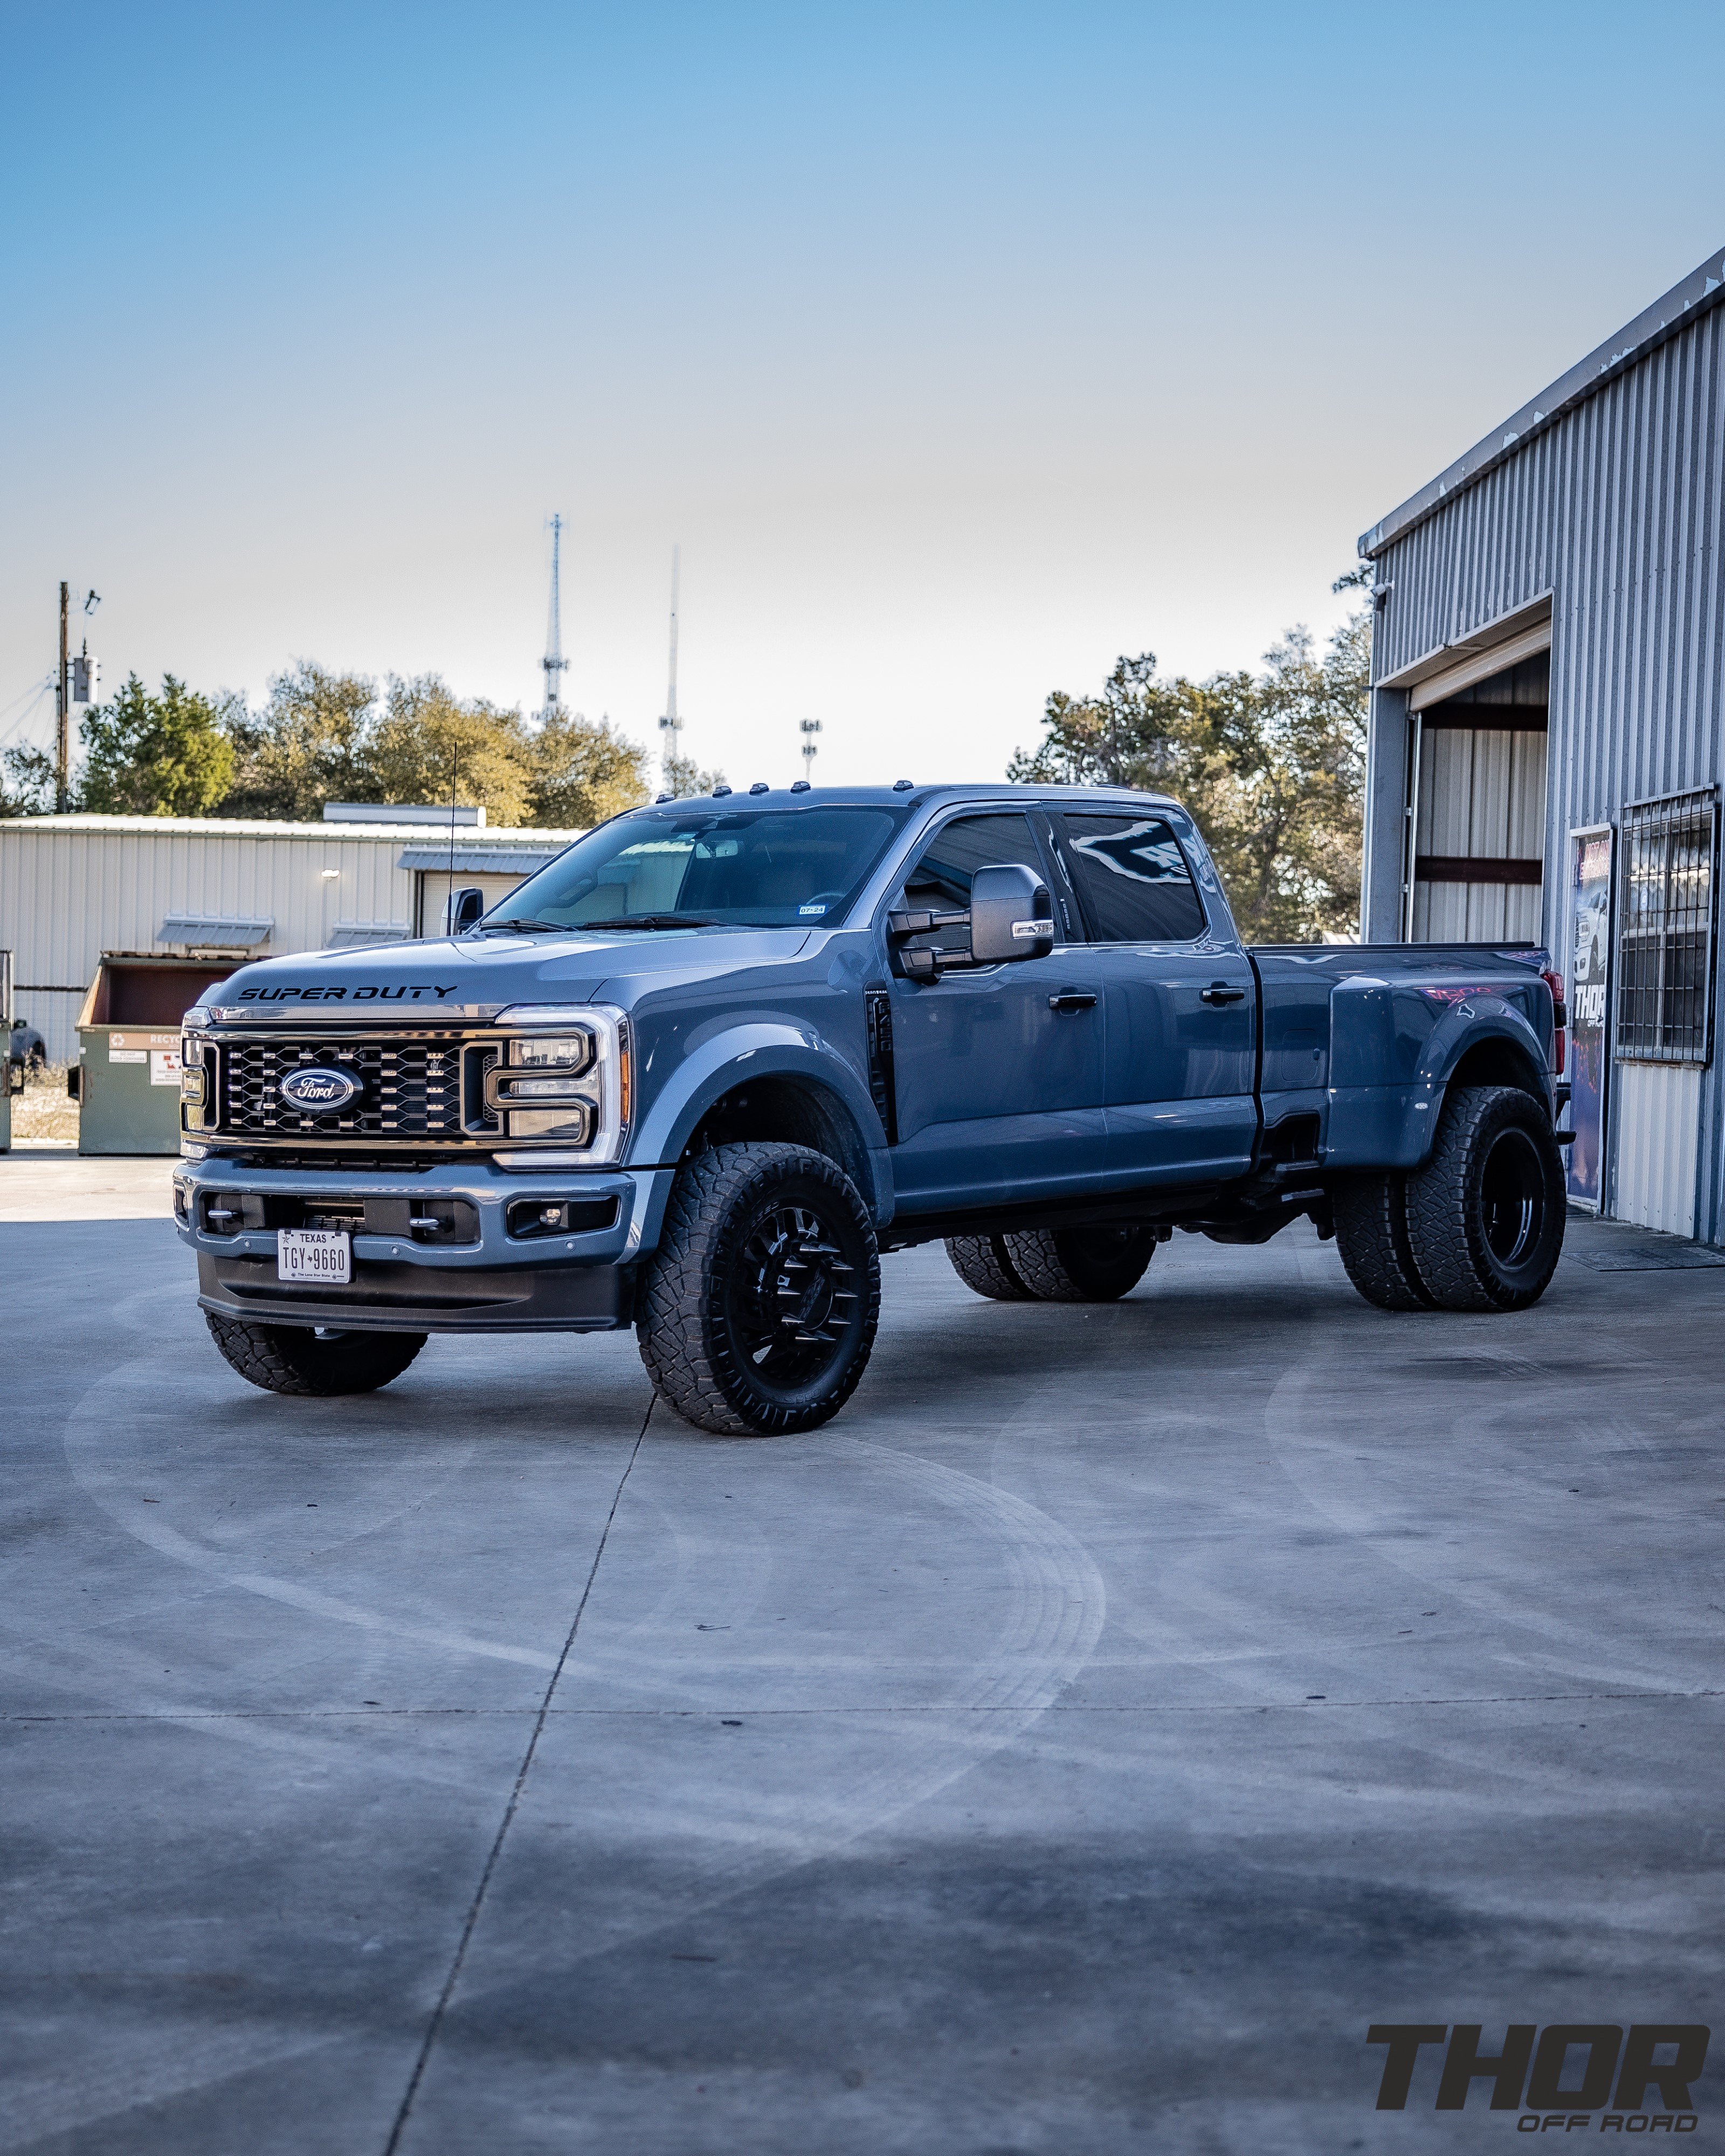 2023 Ford F-450 Super Duty Platinum in Blue with Carli 3.5" E-Venture System, Carli Full Rear Spring Replacement, Carli Torsion Sway Bar, PMF Steering Stabilizer, Carli 3.5" Fabricated Radius Arms, JTX Centerfire 22x8.25" Wheels, 37x12.50R22 Nitto Ridge Grappler Tires, Retrax Pro XR Bed Cover, Spray in Bed Liner, Train Horn, BW Tow and Stow, Curt Hitch Lock